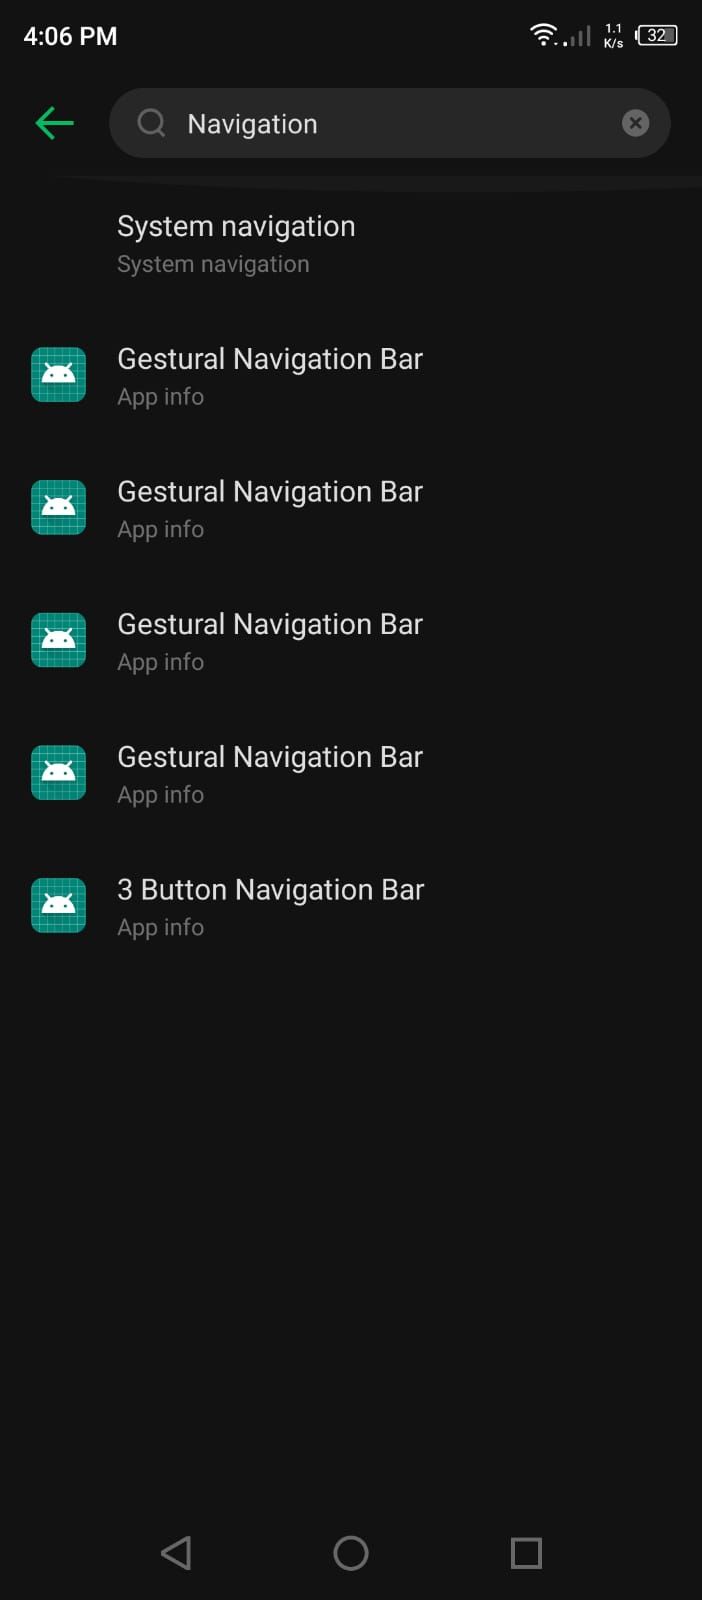 Search Result for Navigation in the Settings Menu